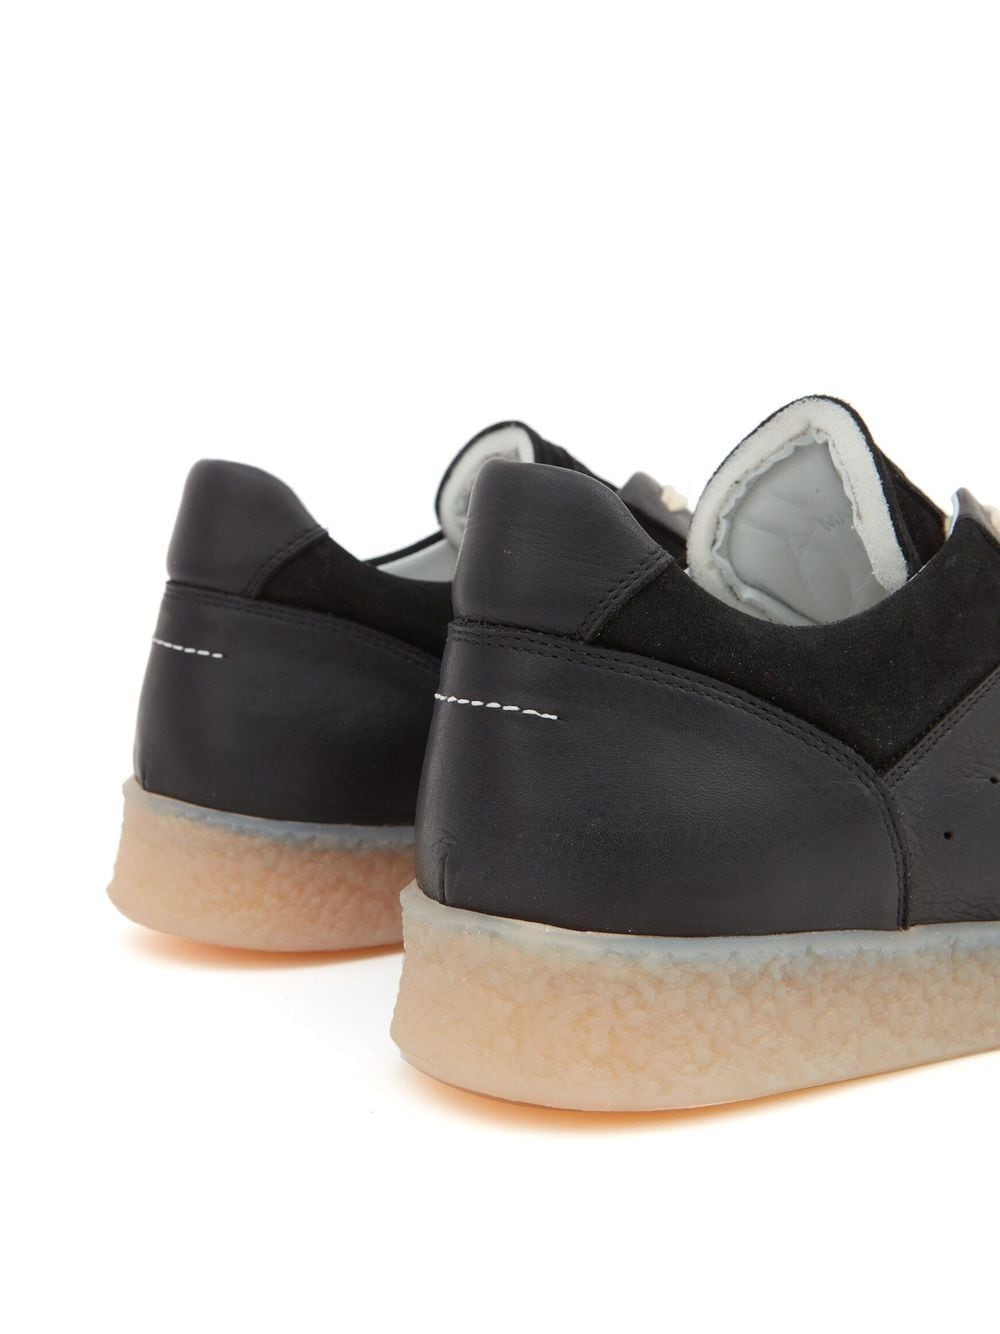 Mallet Marquess Midnight Slick low-top Sneakers - Farfetch